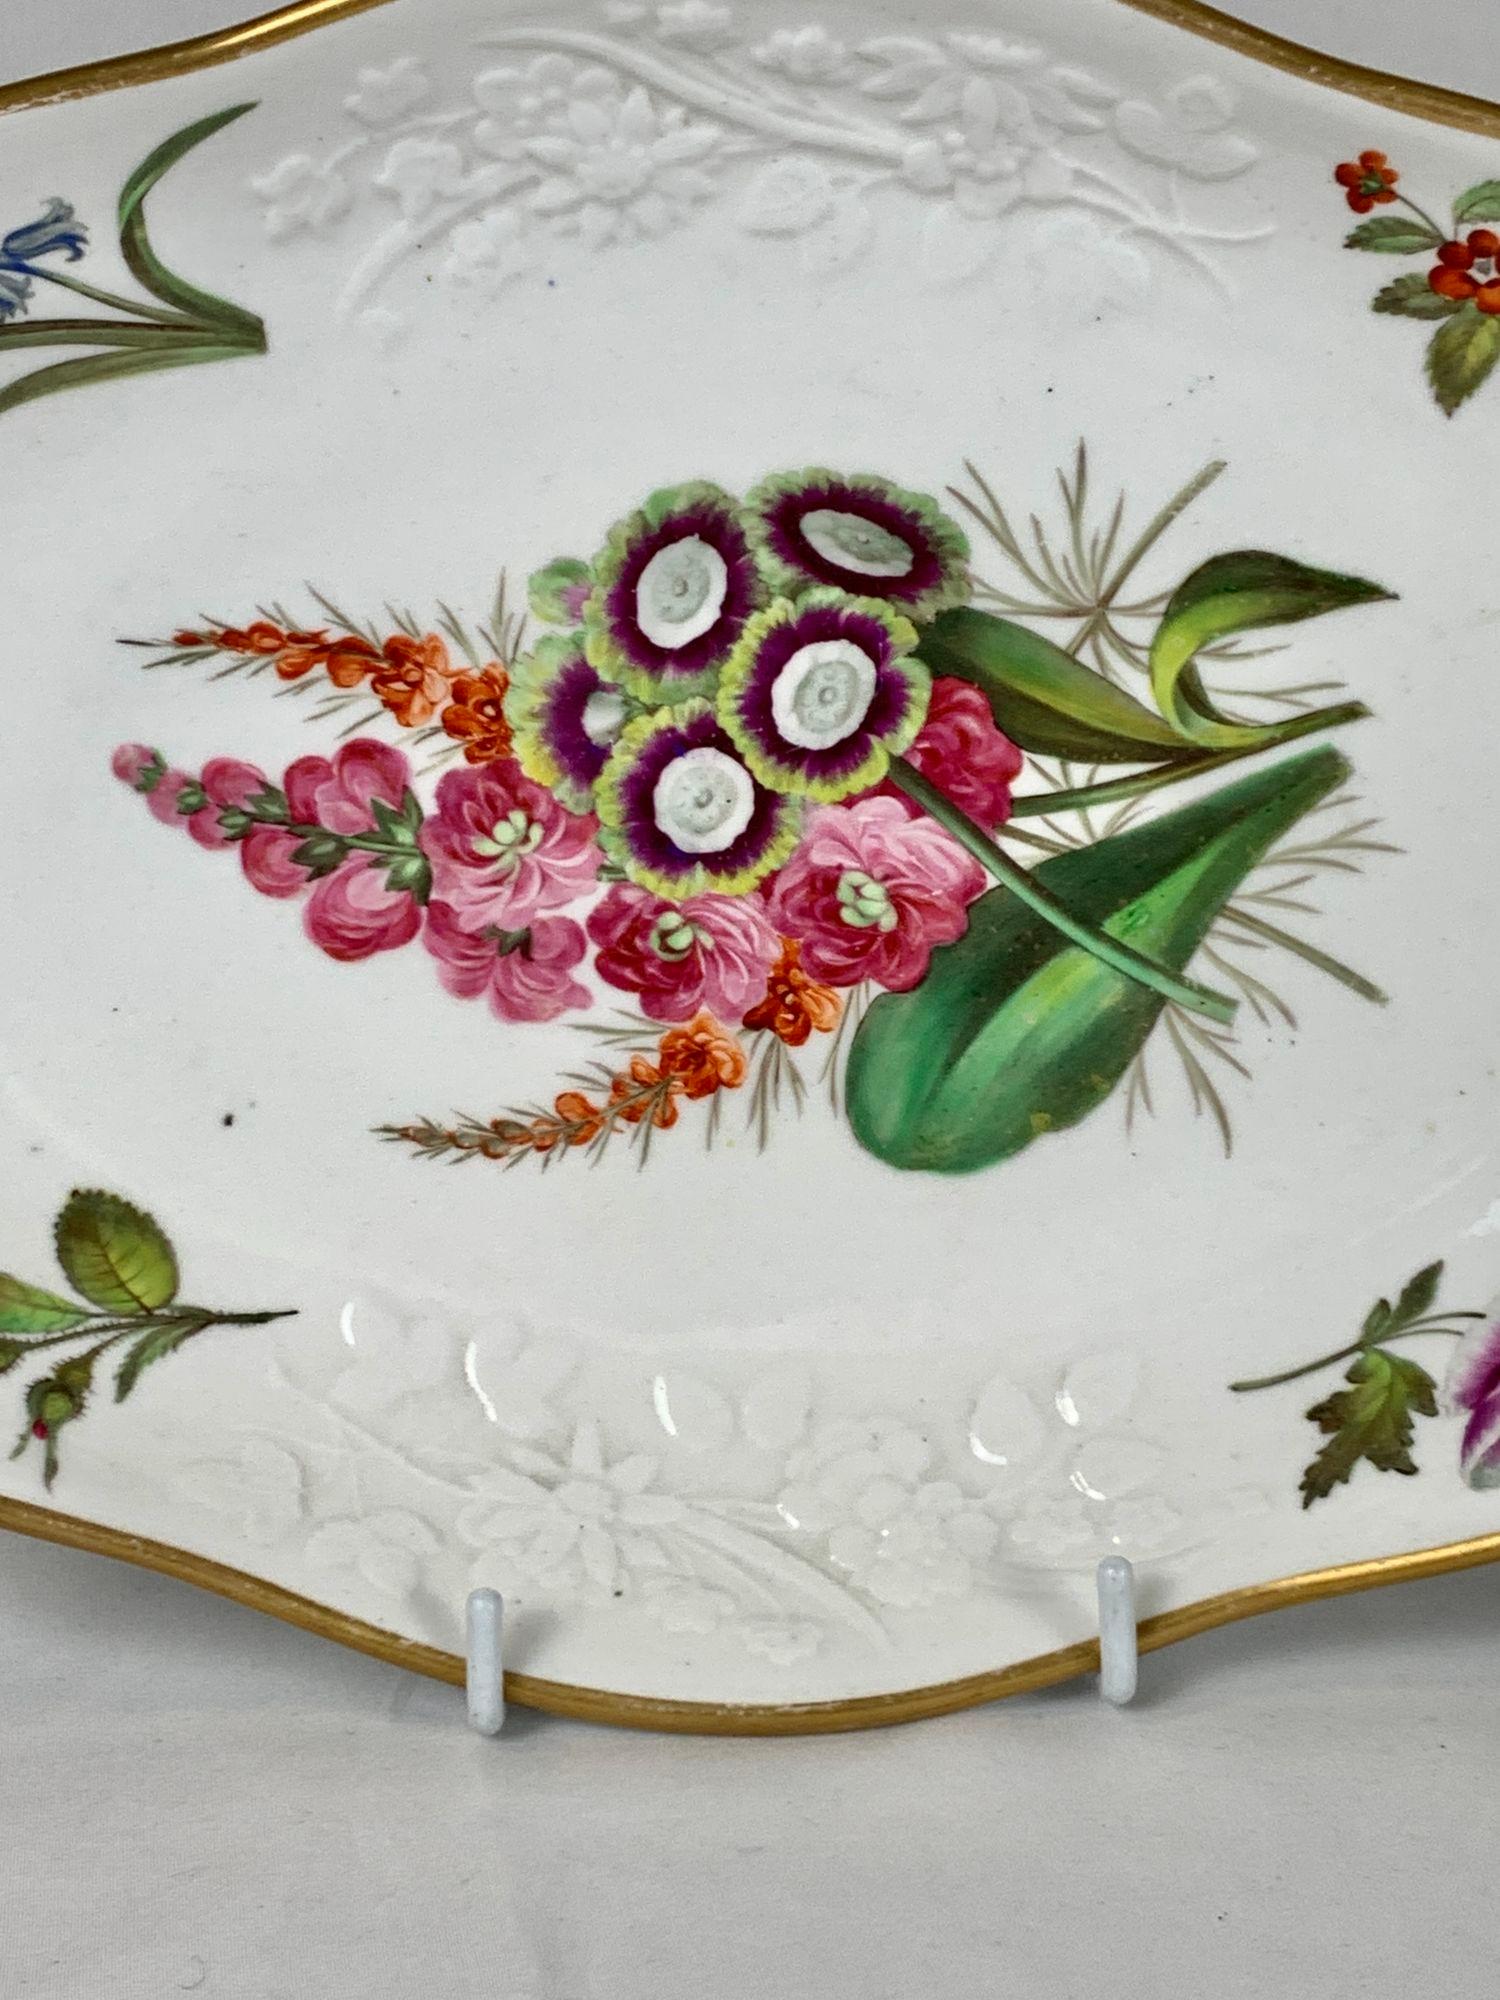 Porcelain Pair Spode Dishes with Hand Painted Flowers England Circa 1820